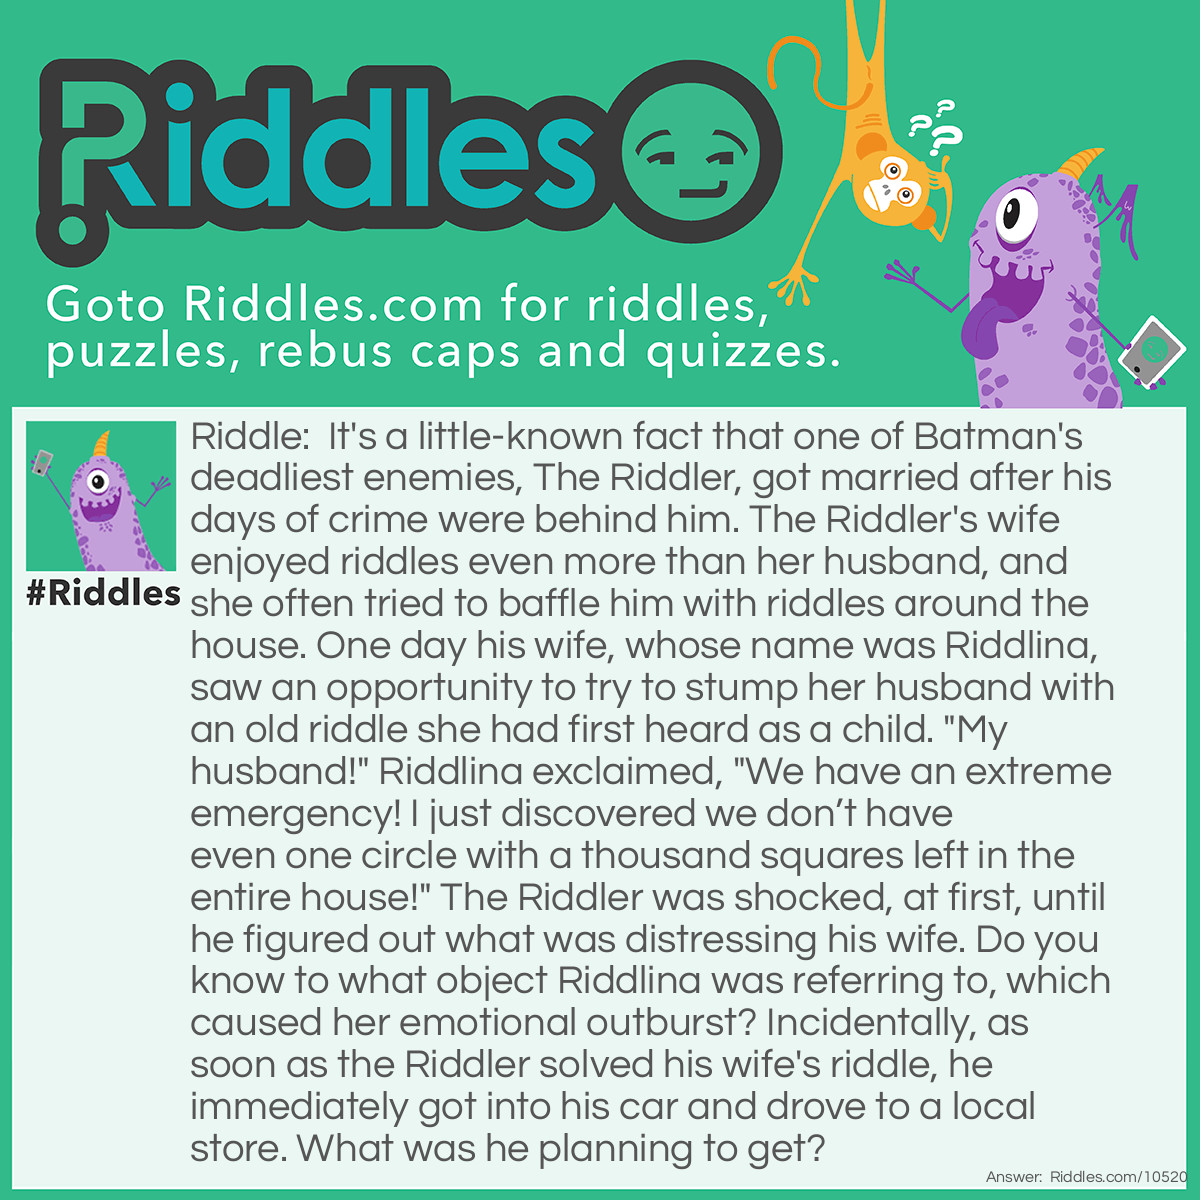 Riddle: It's a little-known fact that one of Batman's deadliest enemies, The Riddler, got married after his days of crime were behind him. The Riddler's wife enjoyed riddles even more than her husband, and she often tried to baffle him with riddles around the house. One day his wife, whose name was Riddlina, saw an opportunity to try to stump her husband with an old riddle she had first heard as a child. "My husband!" Riddlina exclaimed, "We have an extreme emergency! I just discovered we don’t have even one circle with a thousand squares left in the entire house!" The Riddler was shocked, at first, until he figured out what was distressing his wife. Do you know to what object Riddlina was referring to, which caused her emotional outburst? Incidentally, as soon as the Riddler solved his wife's riddle, he immediately got into his car and drove to a local store. What was he planning to get? Answer: The old riddle his wife used (a circle with a thousand squares) to indicate an emergency item that was missing from their house, was a roll of toilet paper. Needless to say, the Riddler immediately went out to purchase some.